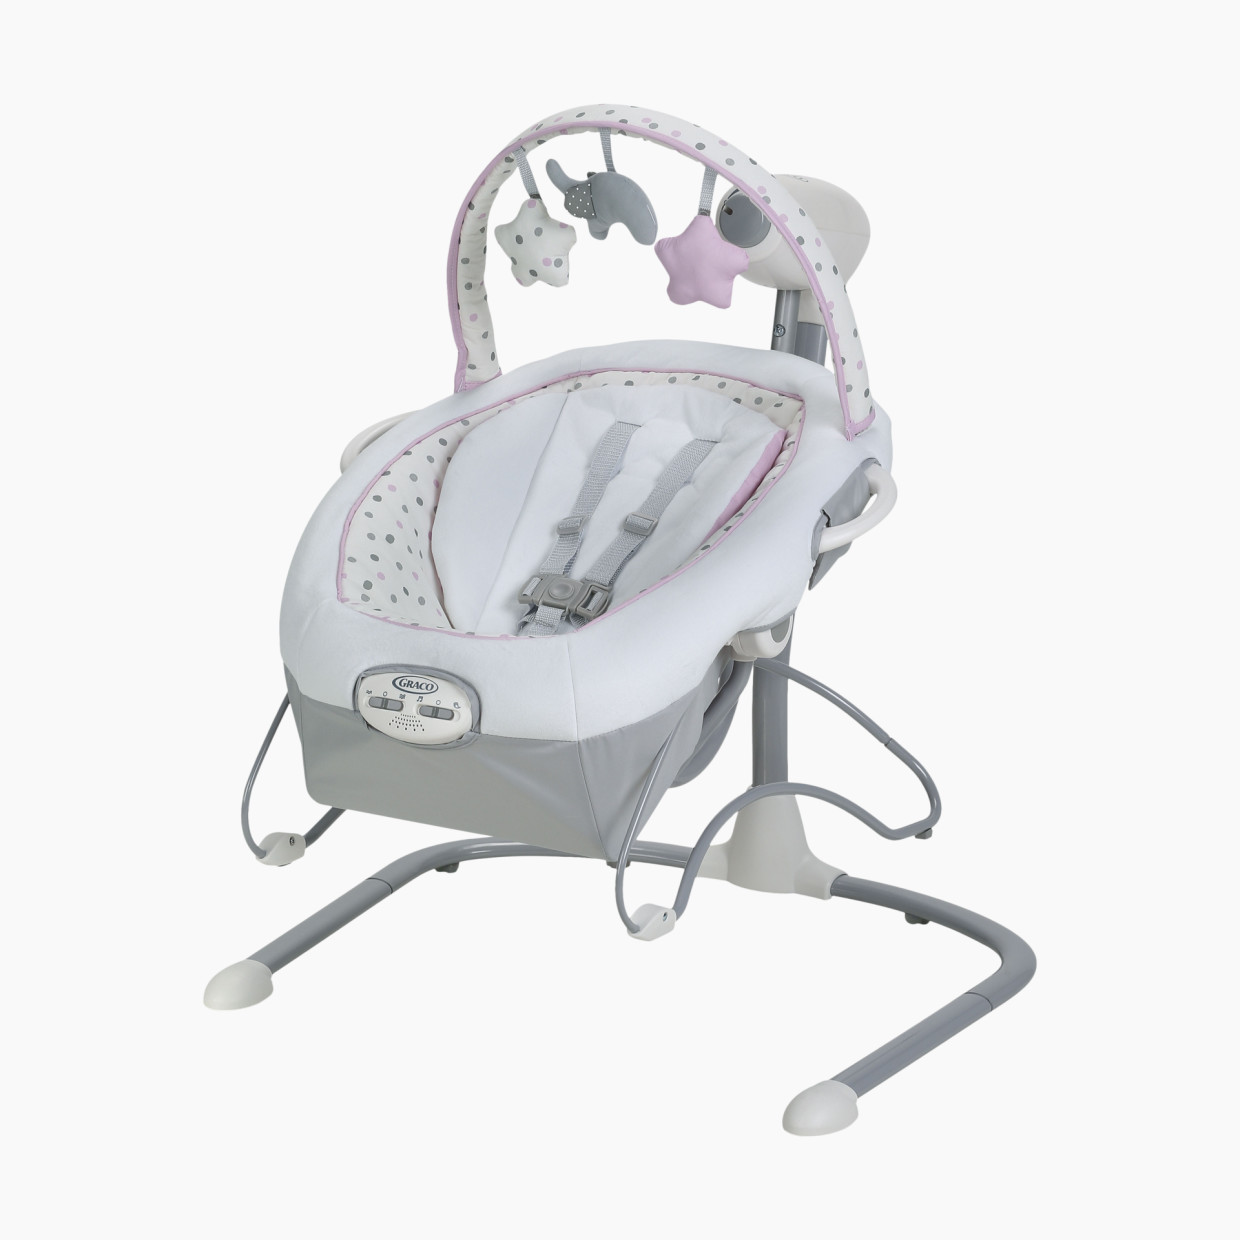 Graco Duet Sway LX Swing with Portable Bouncer - Camila.